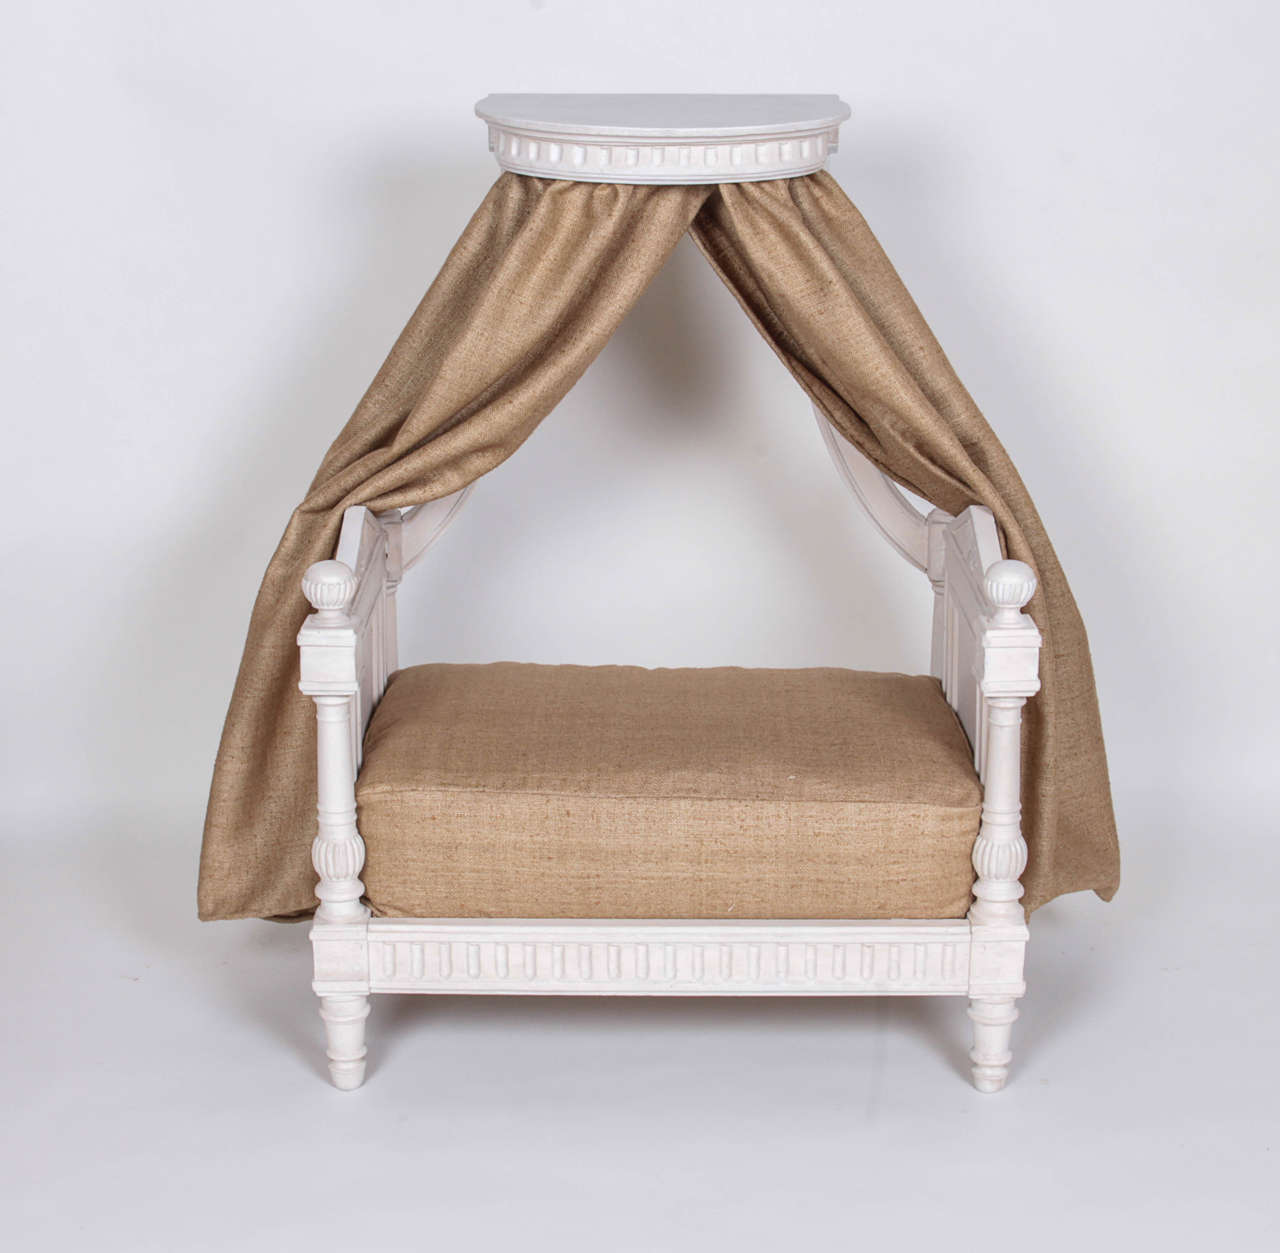 A Directoire period dog bed, with the original wood-and-cord mattress support, now upholstered in shantung silk.